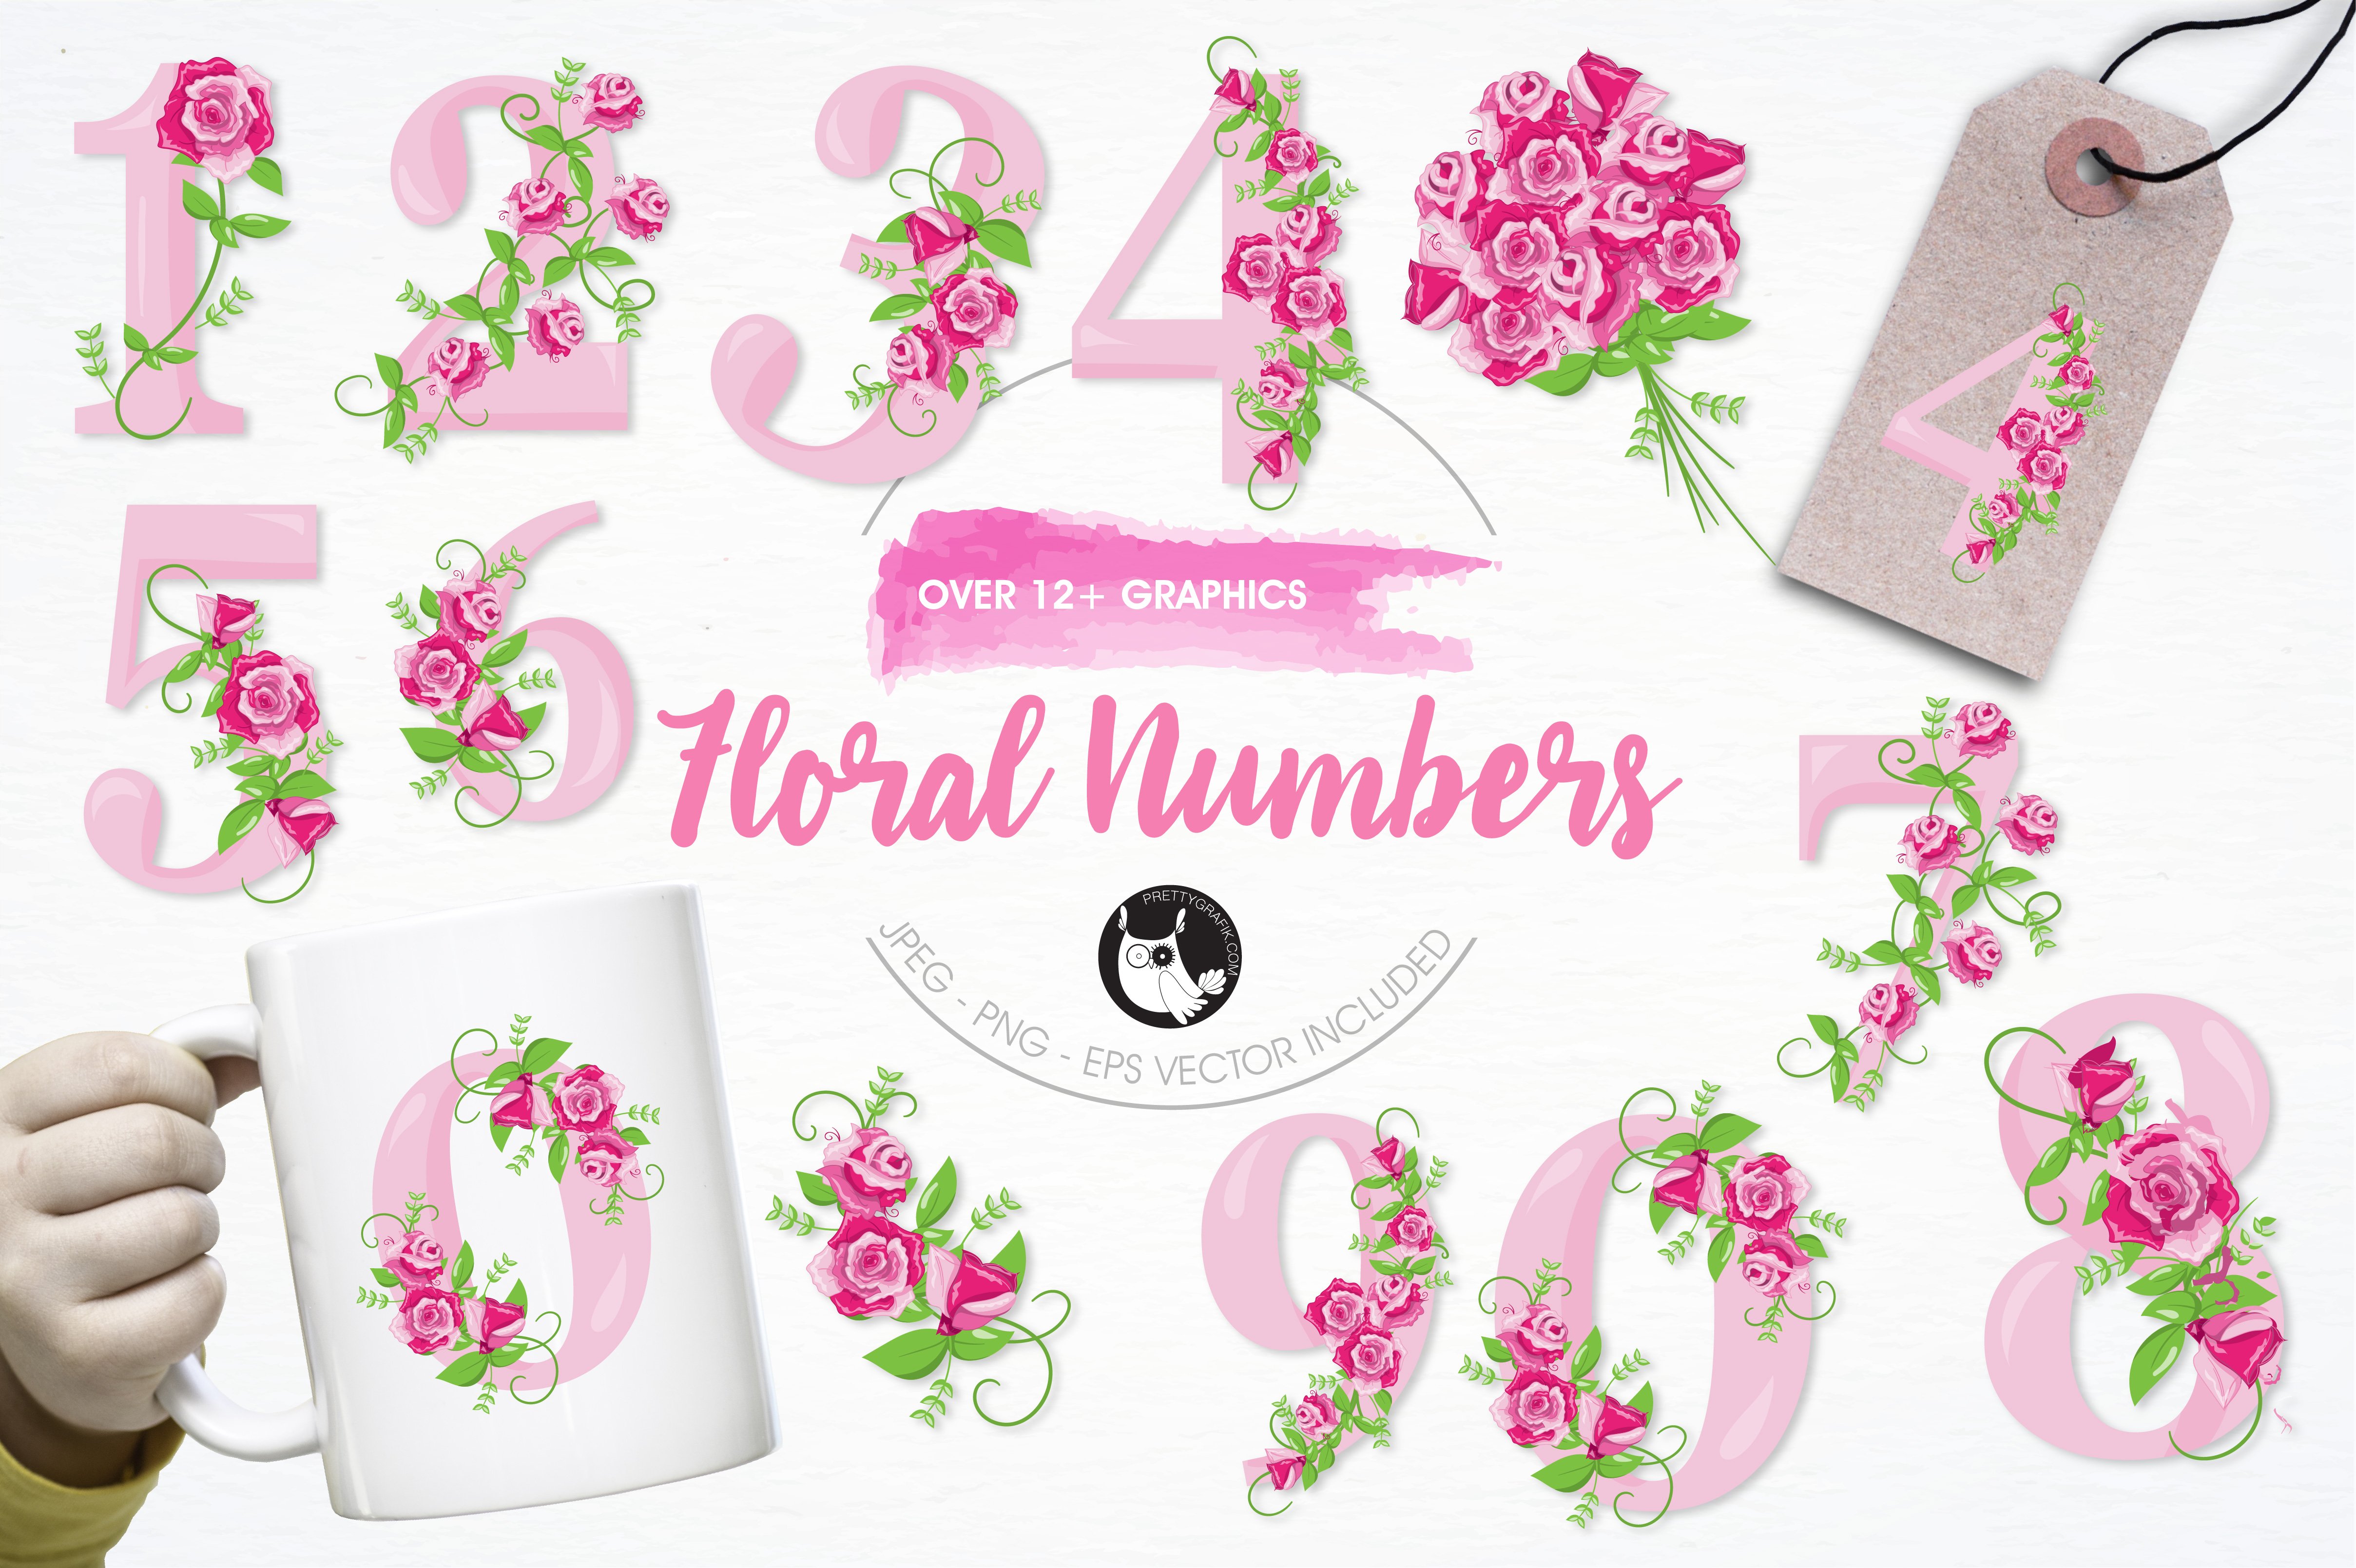 Floral numbers illustration pack - Vector Image